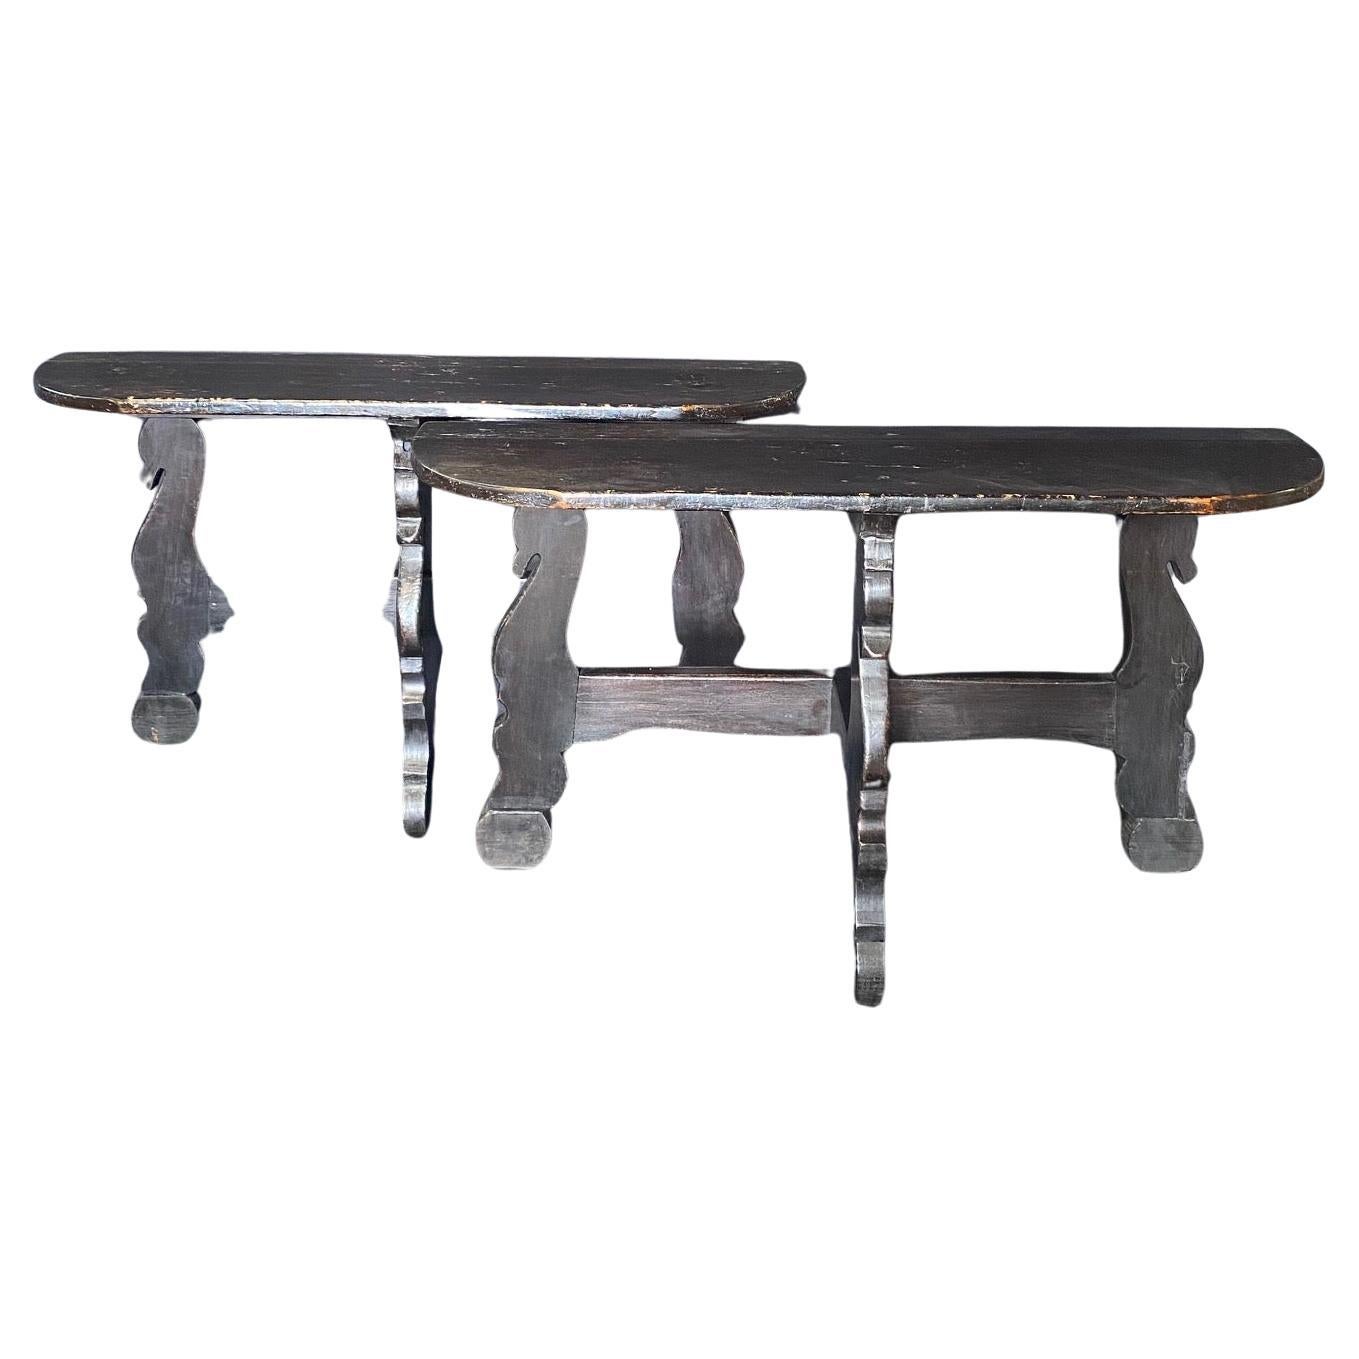  Pair of Antique Spanish Ebony Demilune Tables, Consoles or Side Tables For Sale